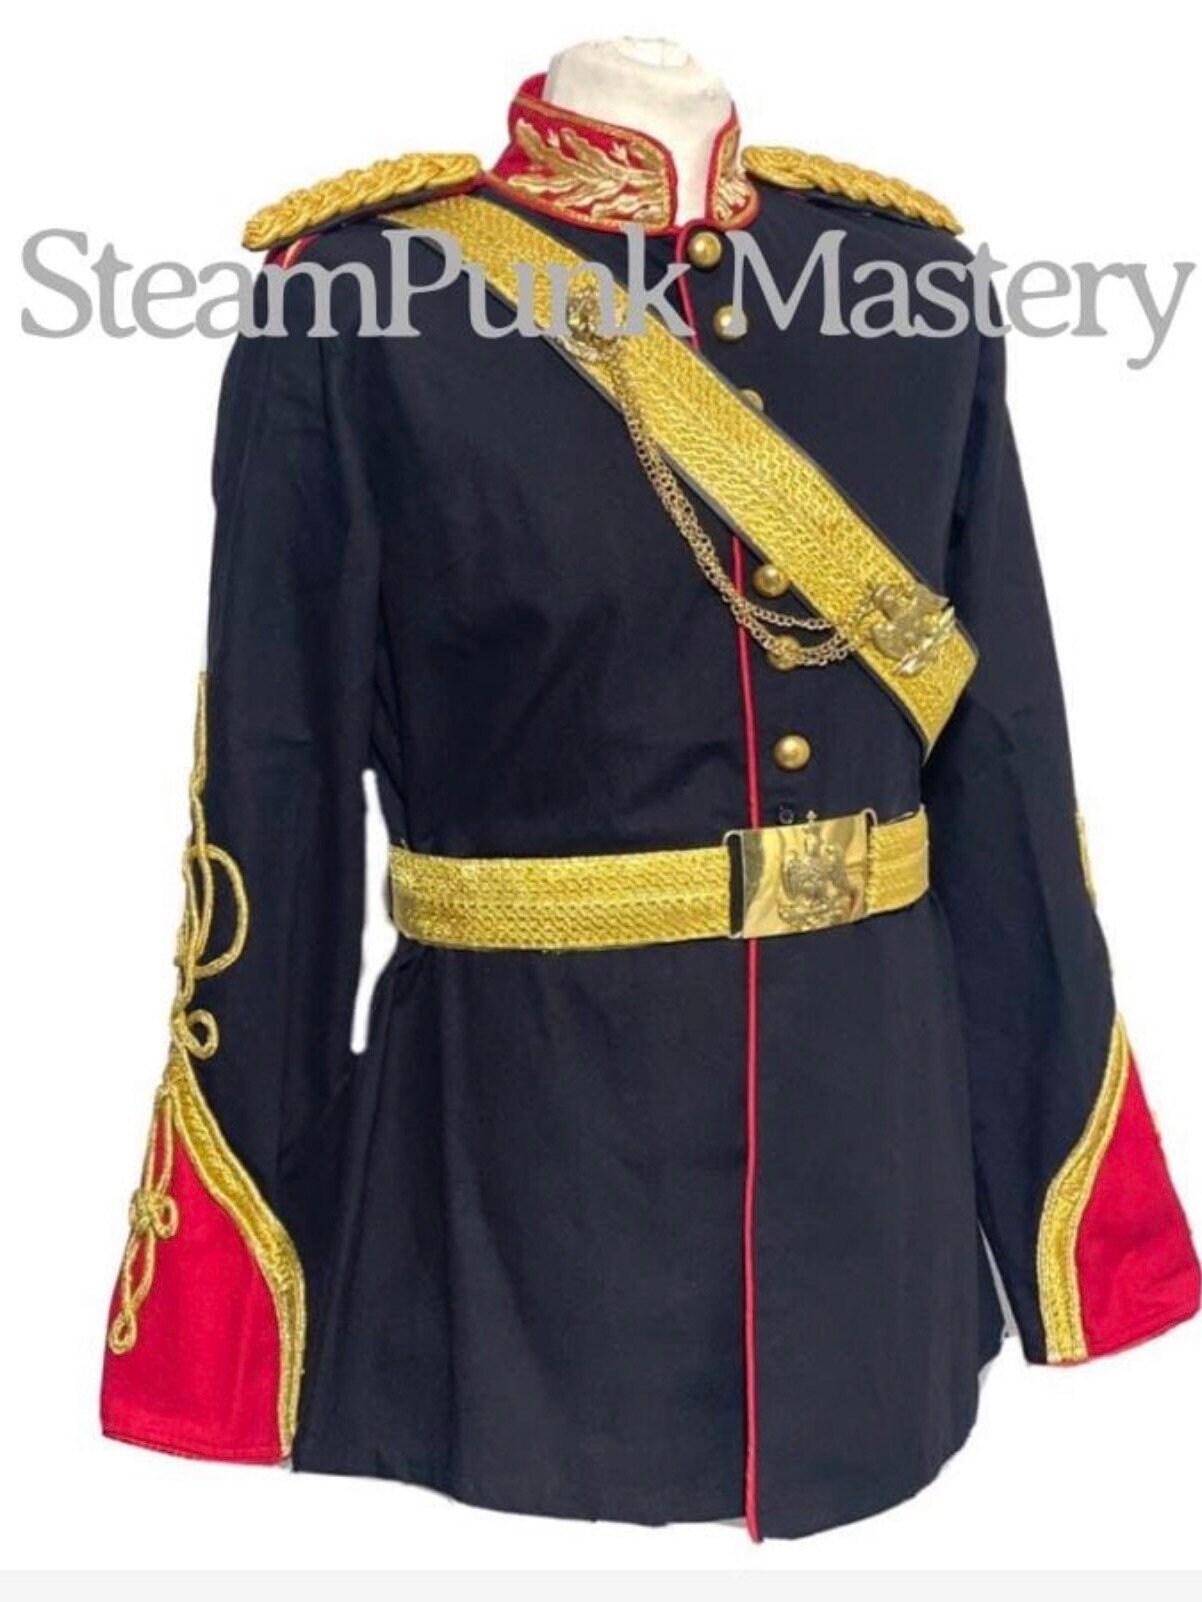 4pcs Ceremonial Officers Black/red Jacket With Cross Belt & - Etsy